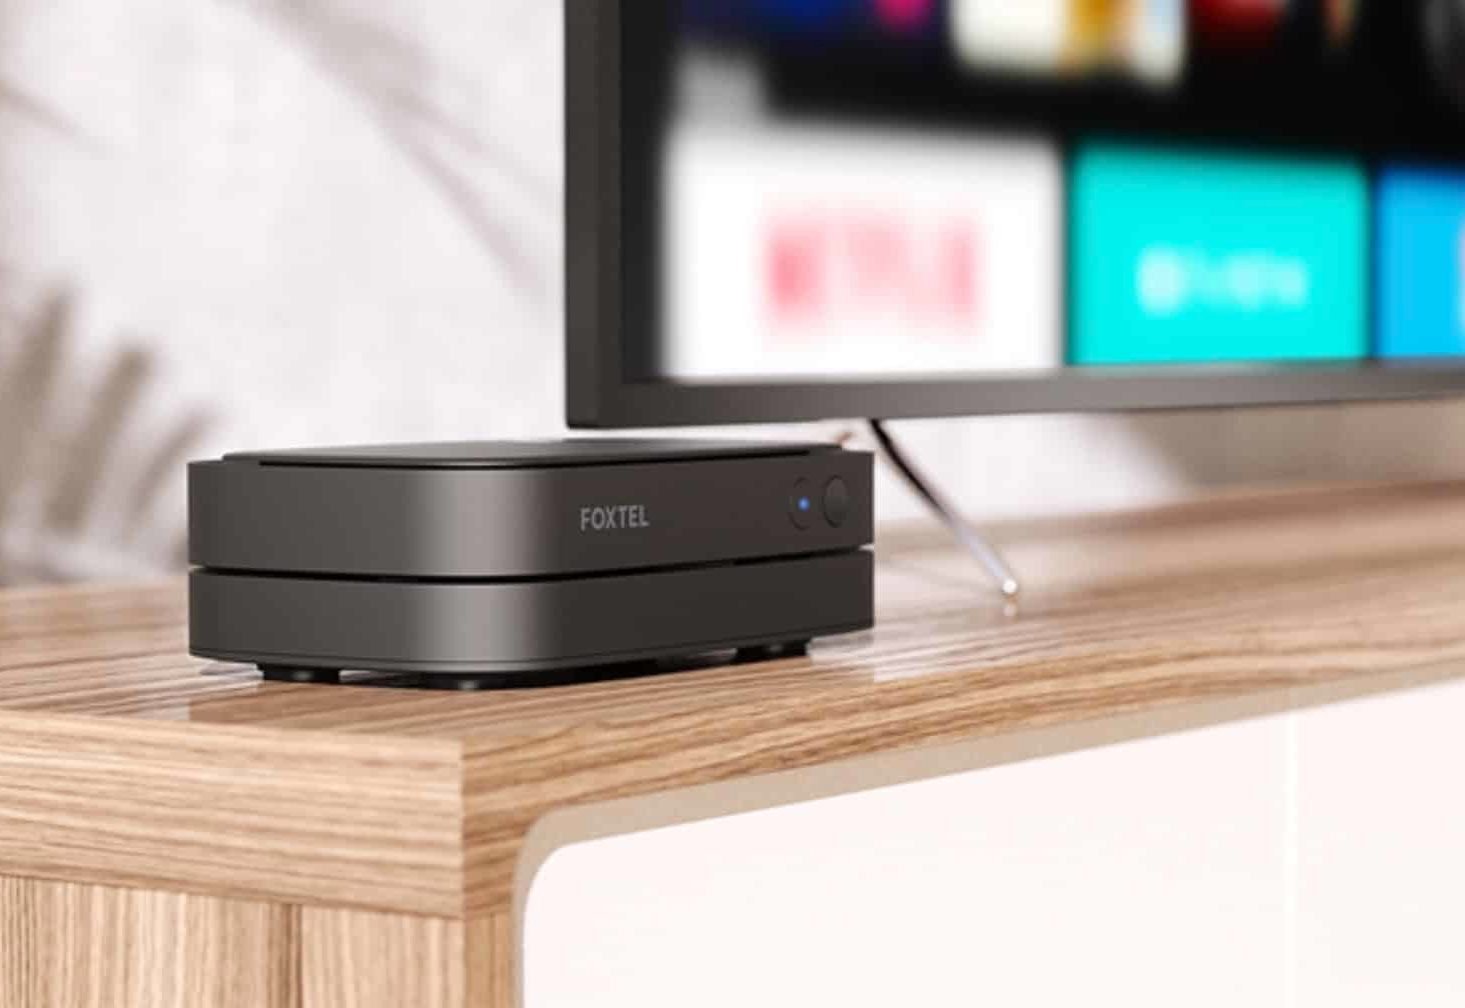 Foxtel's new streaming box, the iQ5 (image - Foxtel)